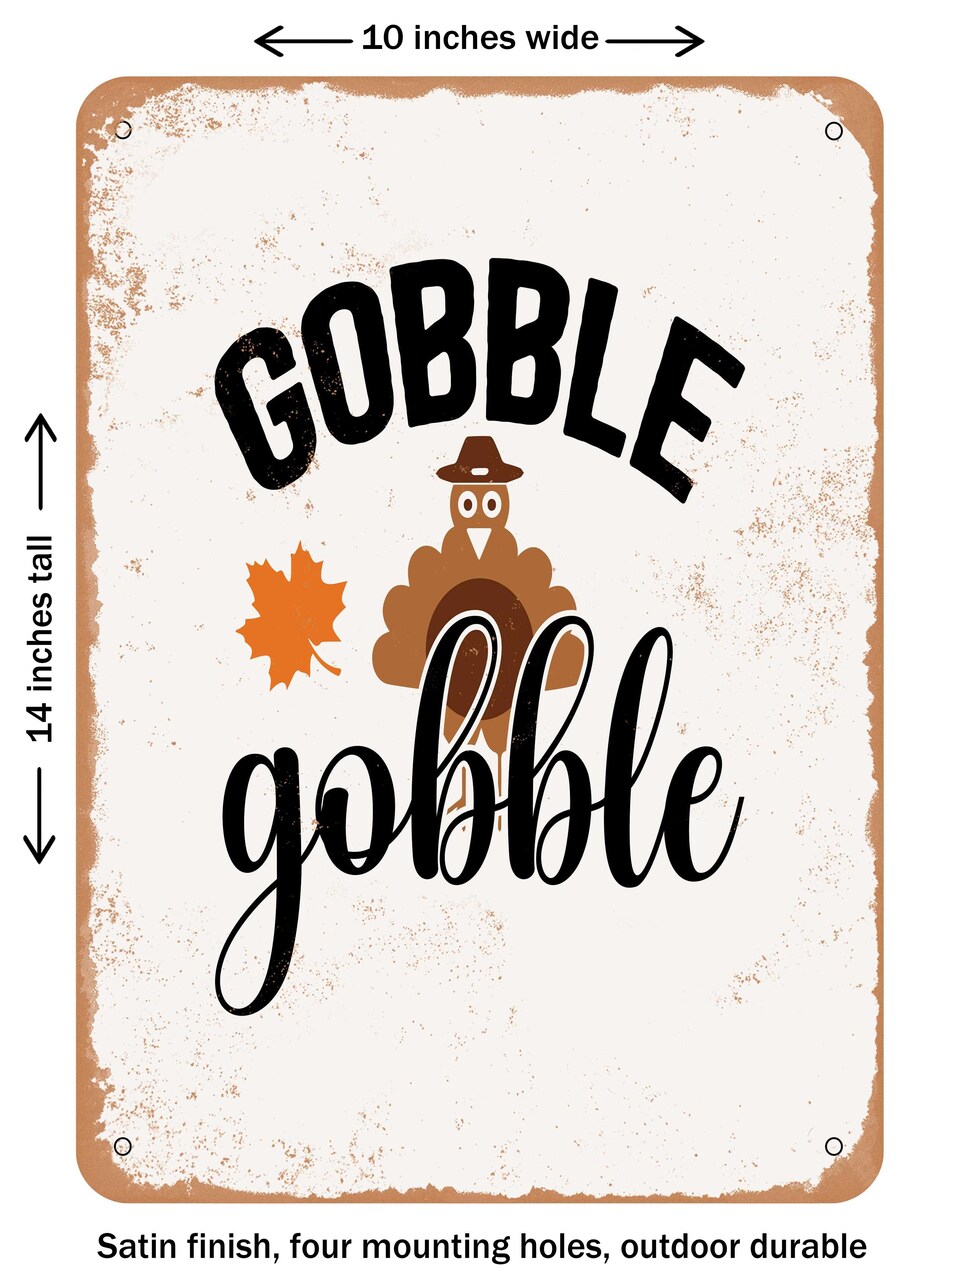 DECORATIVE METAL SIGN - Gobble Gobble - 2  - Vintage Rusty Look